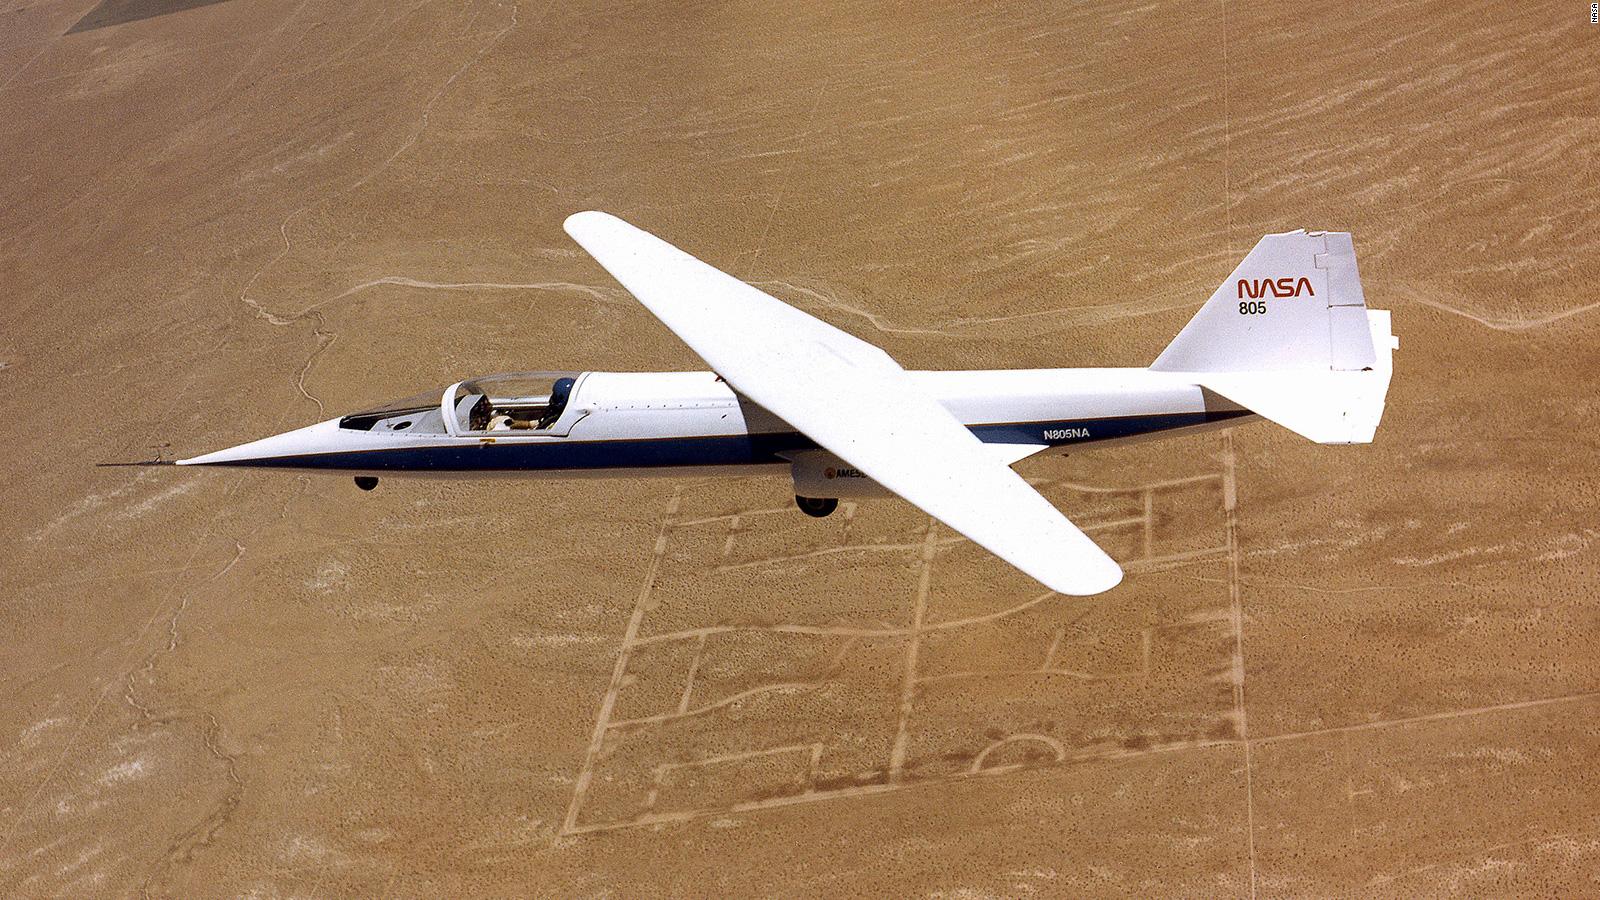 Why did NASA test an airplane with this curious rotating wing?